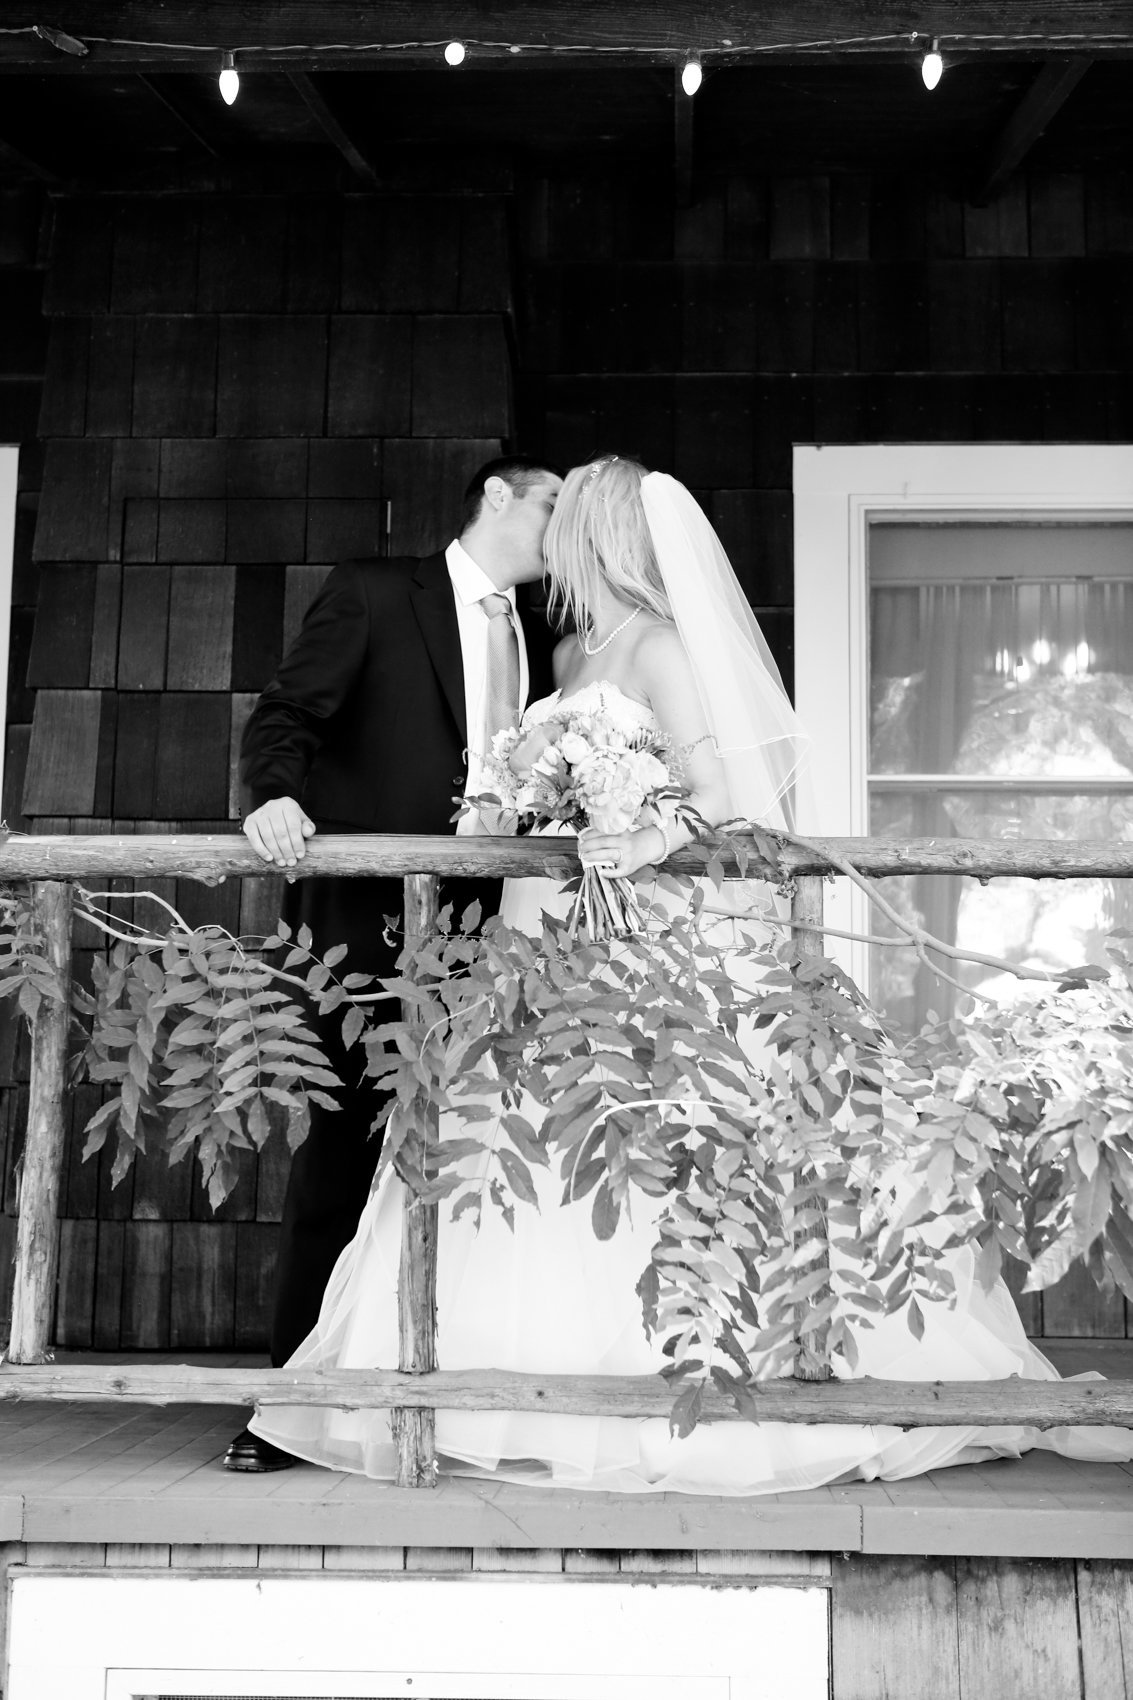 Wedding photography black and white woodsy setting greenery and rustic elements